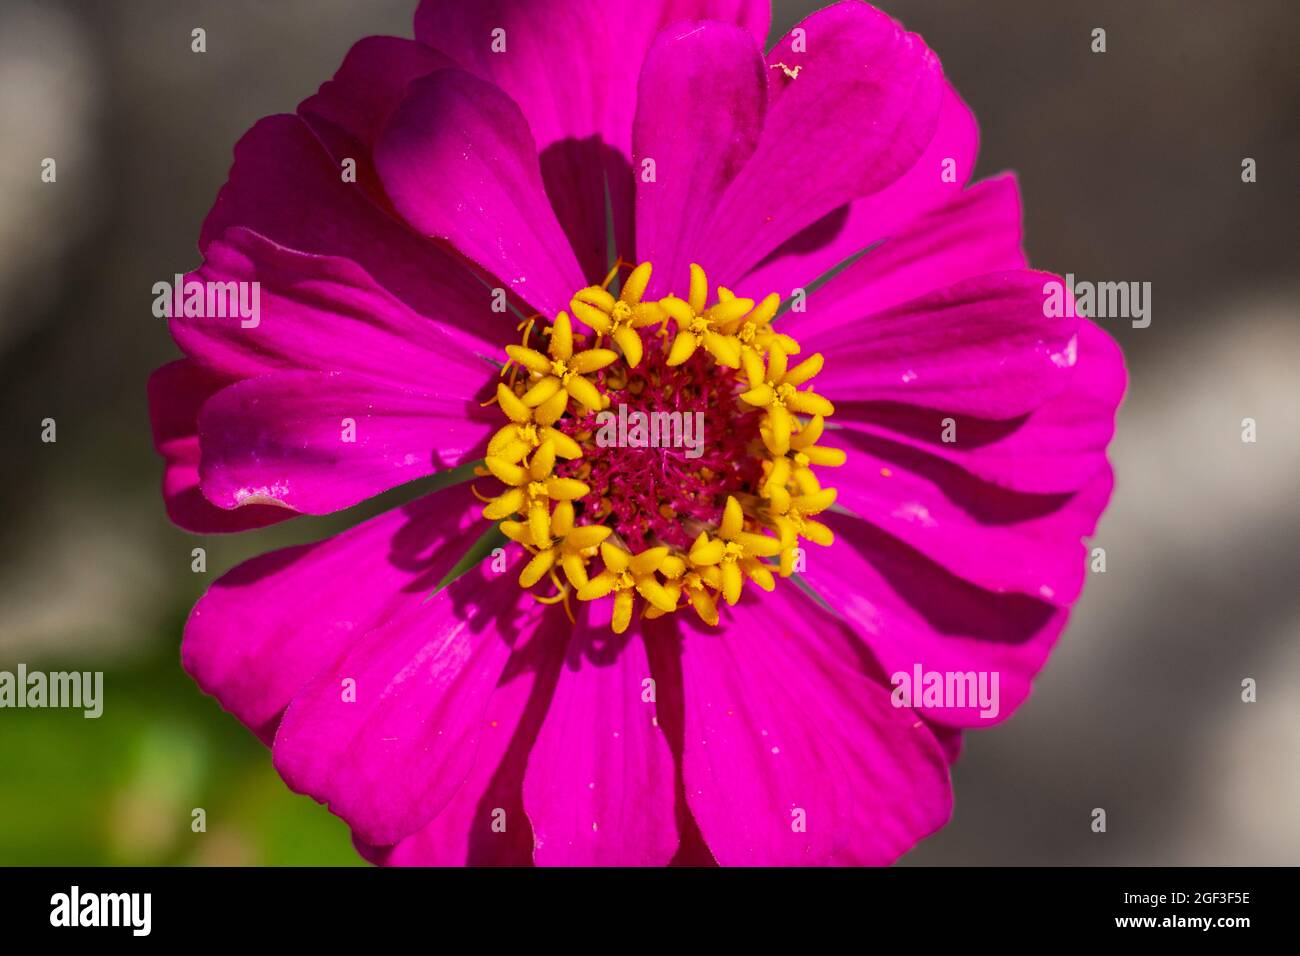 Zinnia Forecast in top view image, with single layer of vivid magenta petal leaves and bright yellow crown tubes. Stock Photo